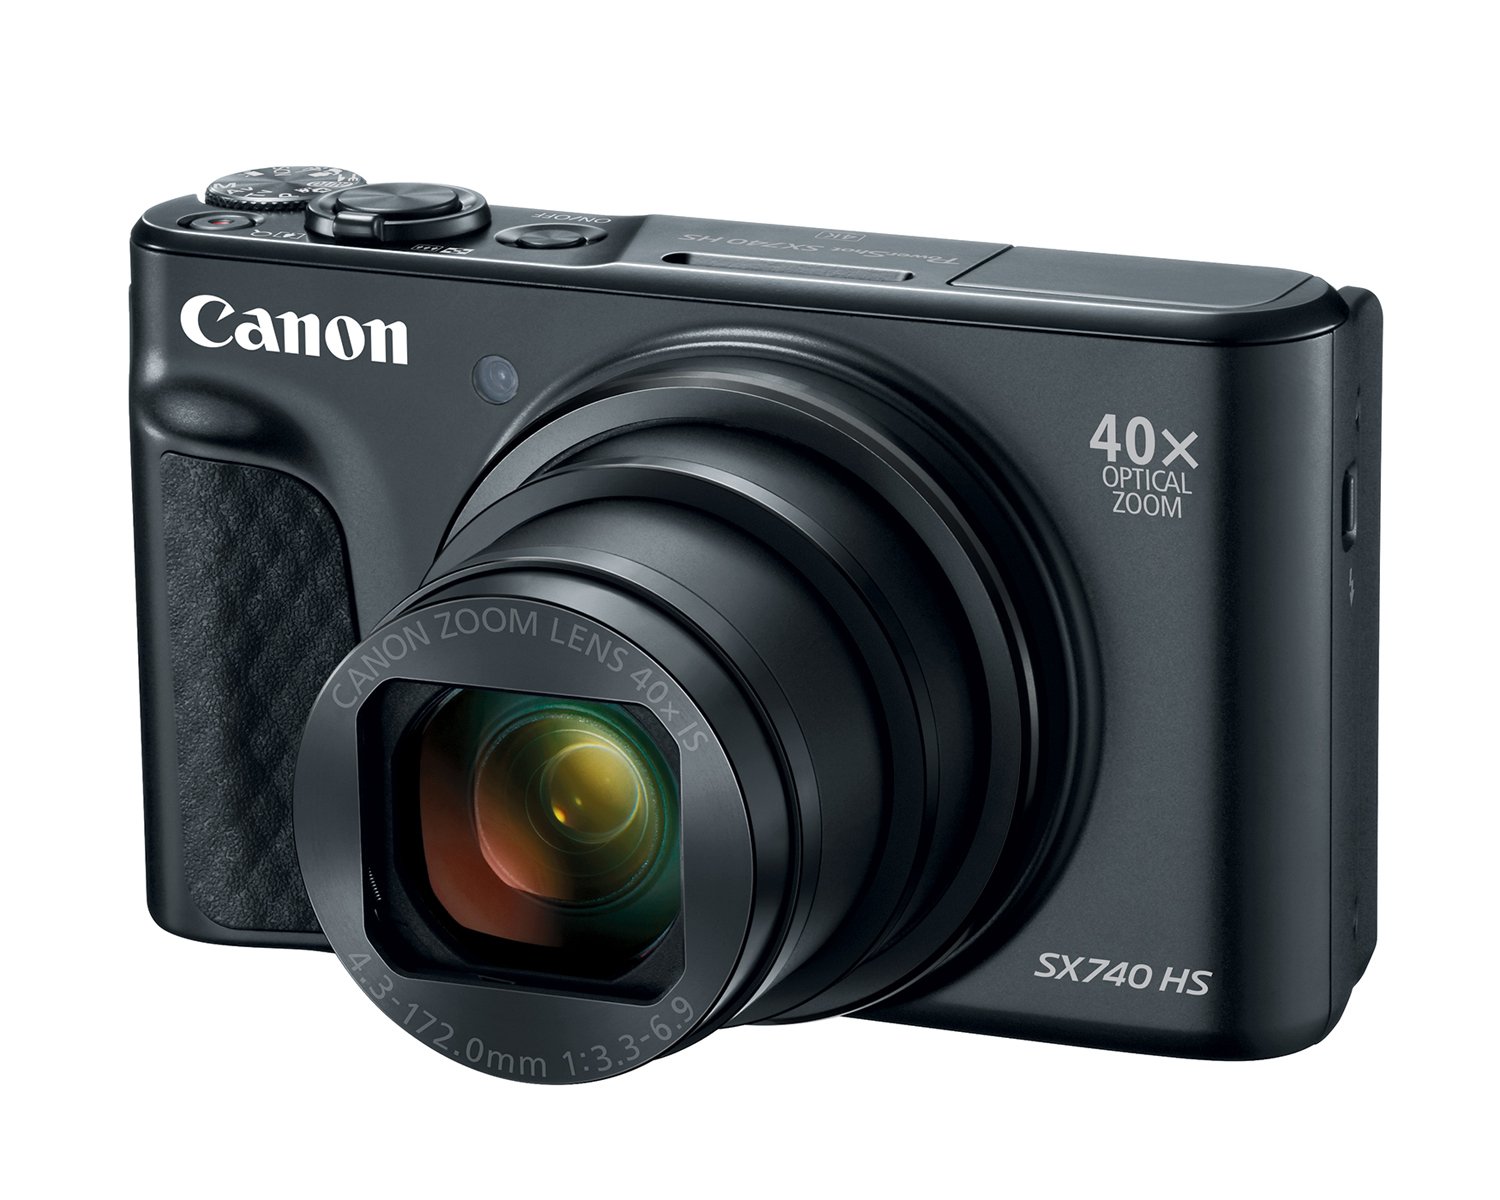 Canon PowerShot SX740 HS 20MP Digital Camera with 40x Optical 